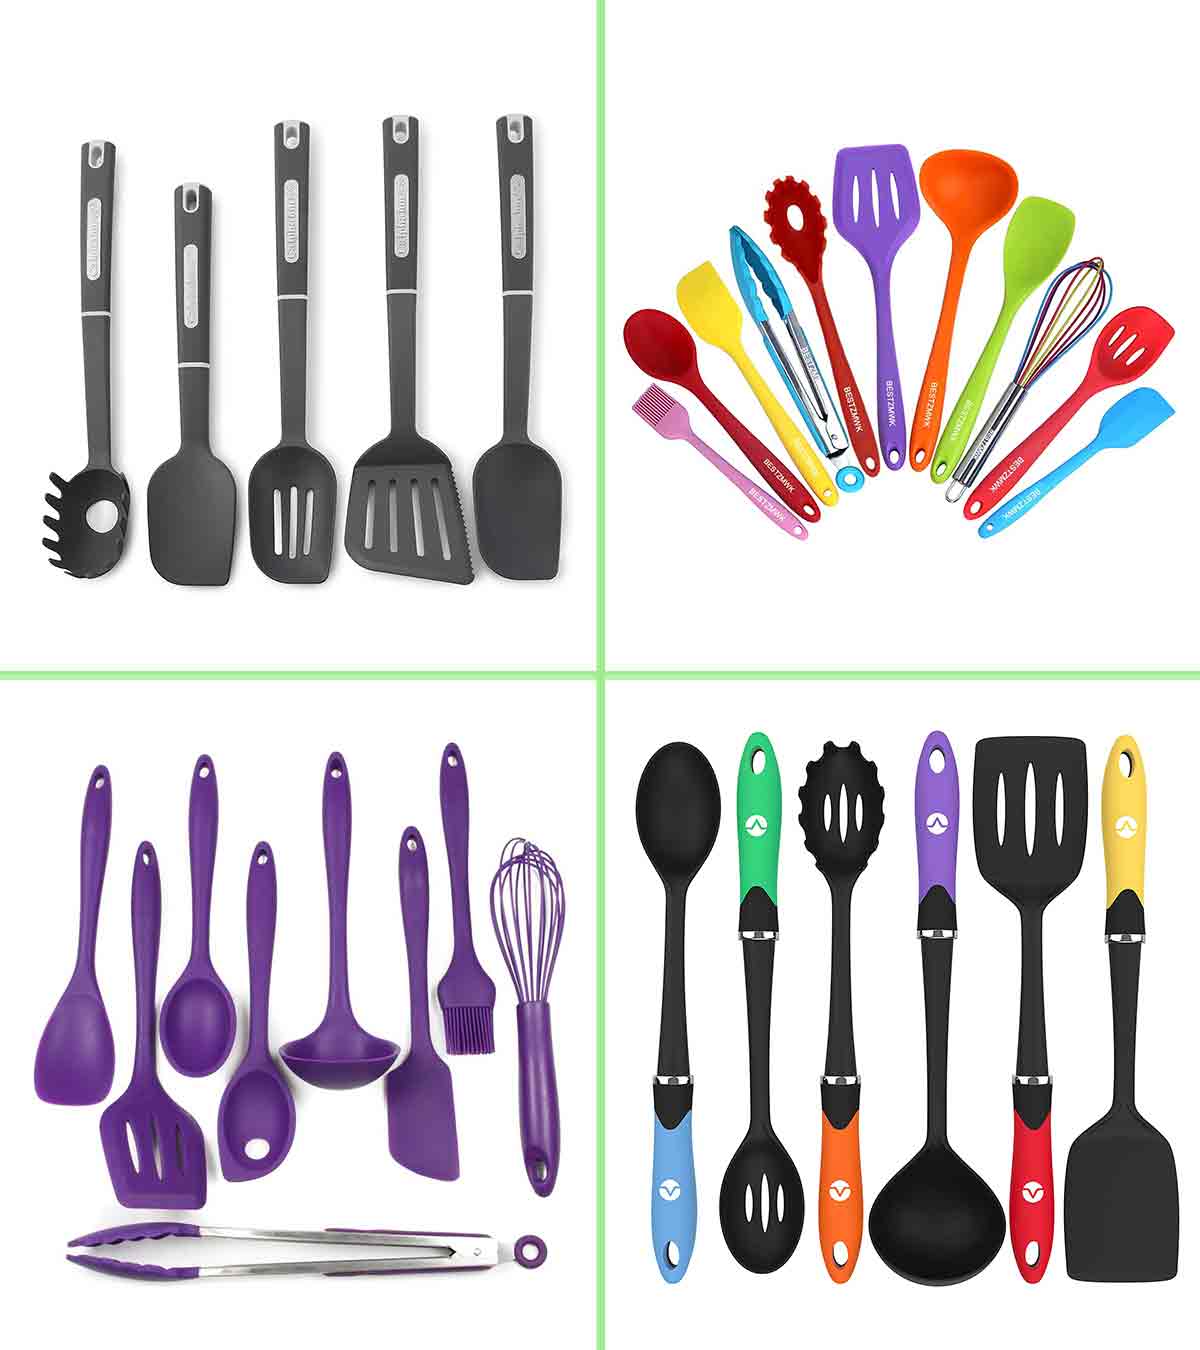 Kaluns Multi Color Utensils Wood and Silicone Cooking Utensil Set (Set of 21)